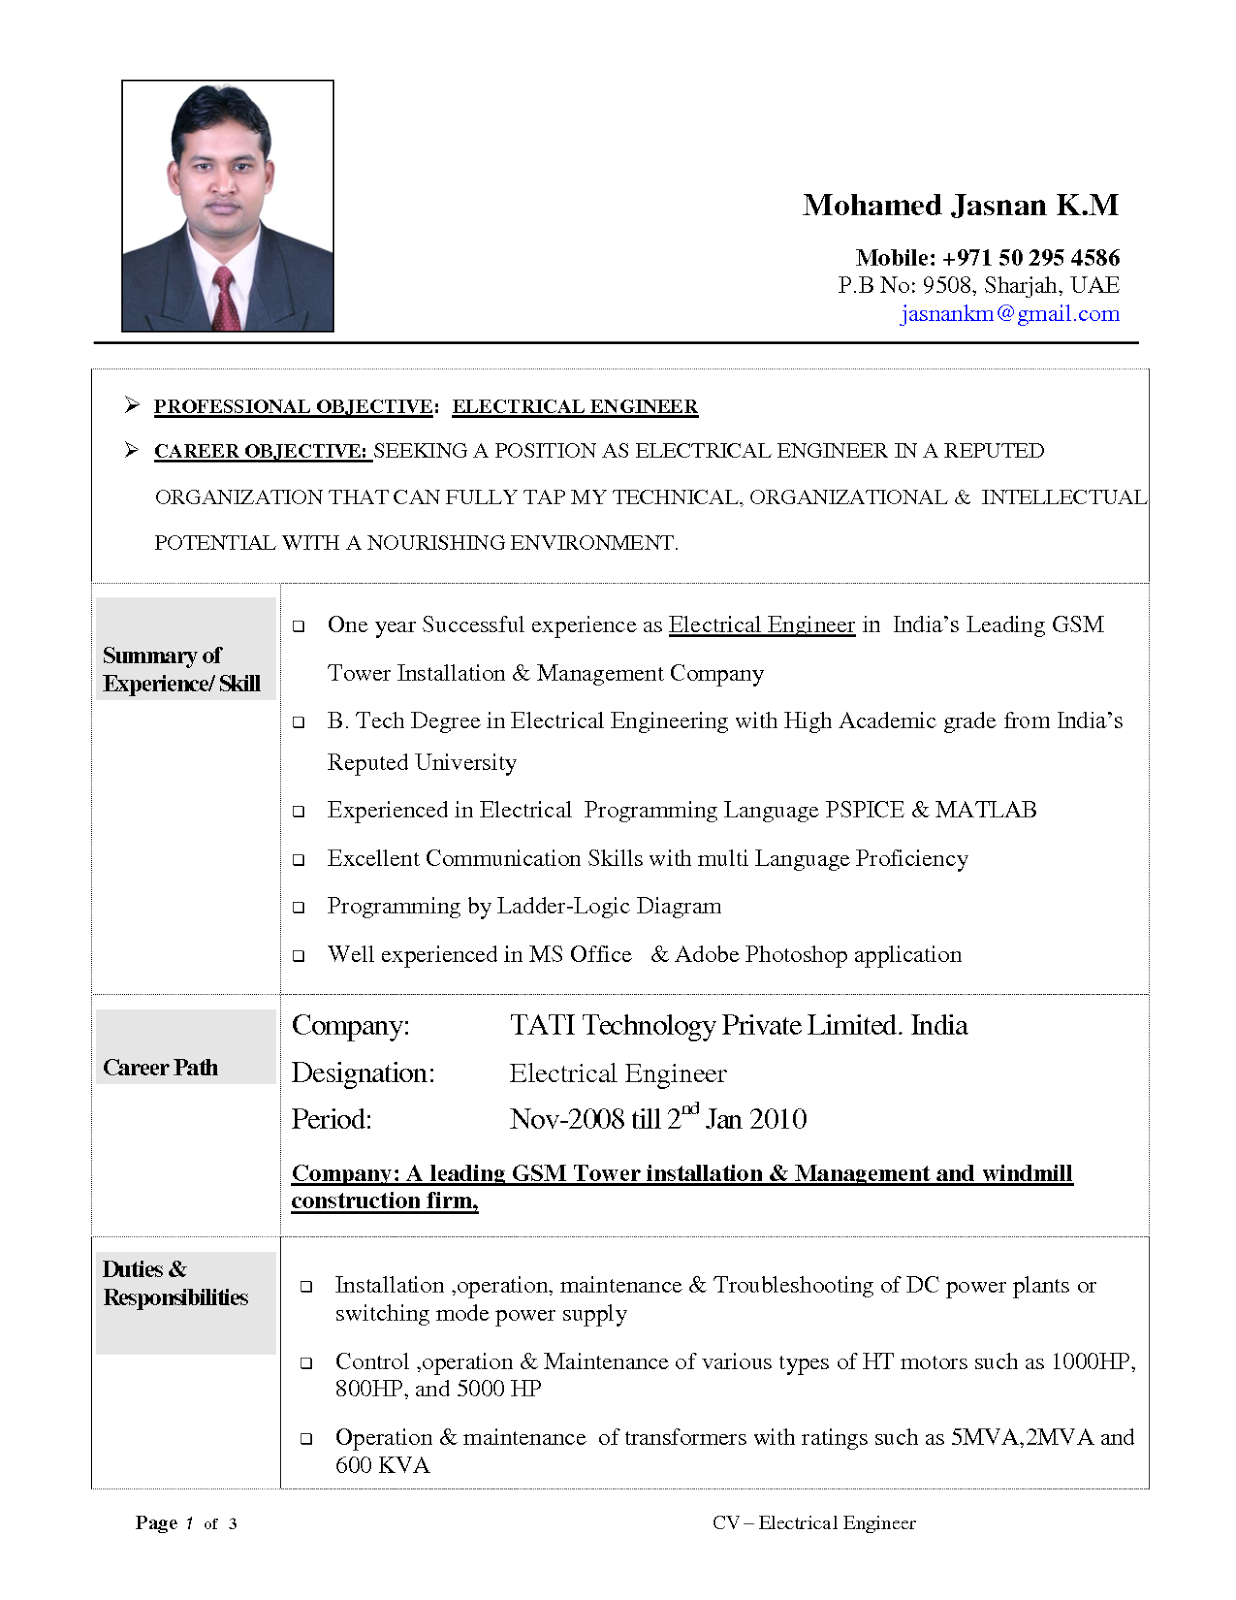 resume objective examples for students, resume objective examples customer service, resume objective examples it professional, resume objective examples for teachers, general resume objective examples, best resume for electrical engineer, electrical engineering resume sample, electrical engineering resume sample for freshers, free-sampleresumes.blogspot.com